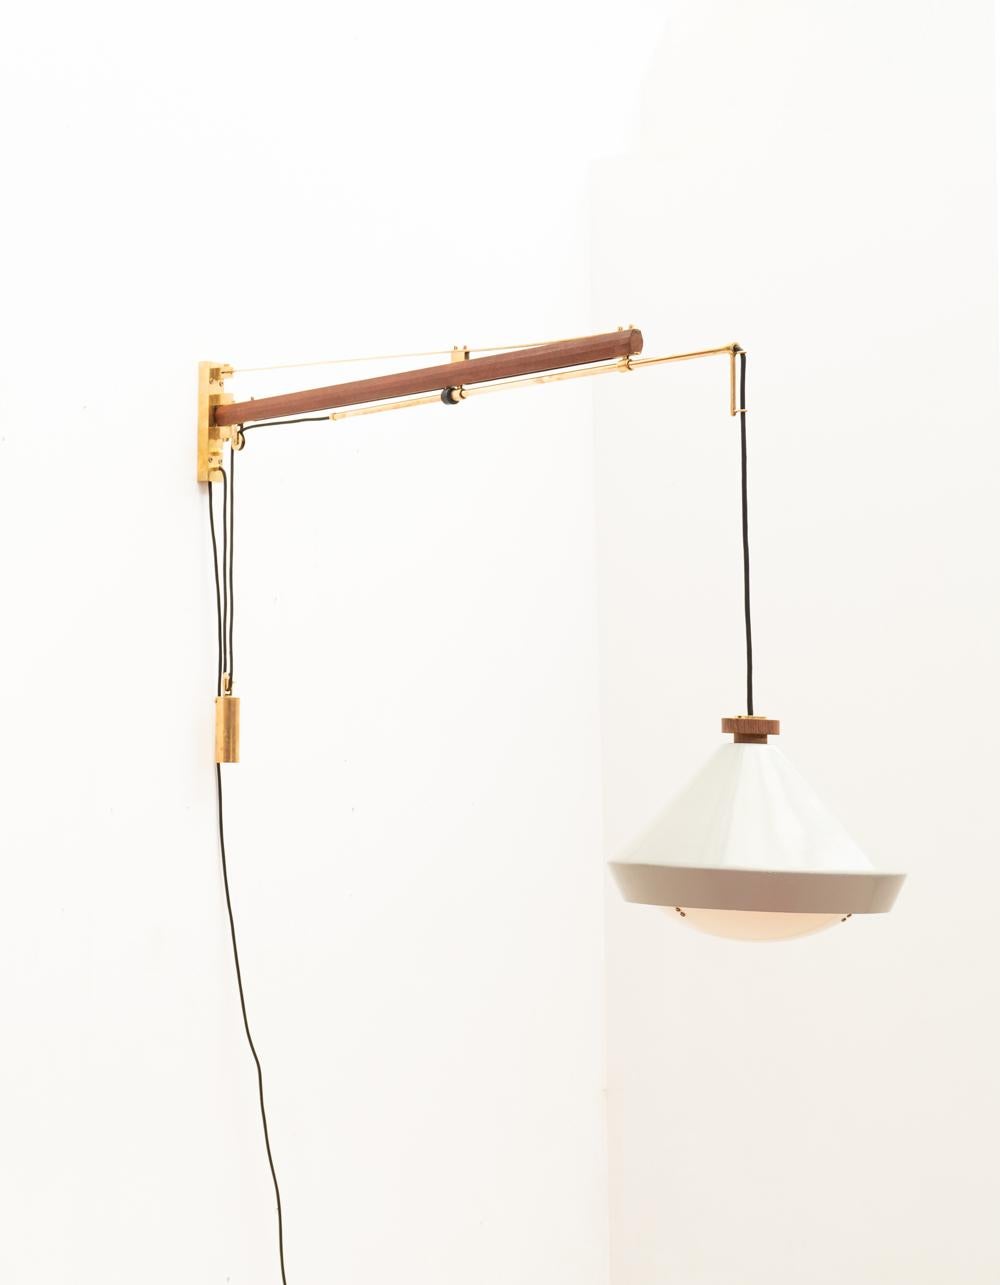 Crafted in 1957 by O-Luce in Italy, the Tito Agnoli Mod. 177A wall lamp exemplifies technical design and material refinement. With teak, solid brass, enameled aluminum, and white acrylic, it epitomizes elegance.

Its ingenious construction allows